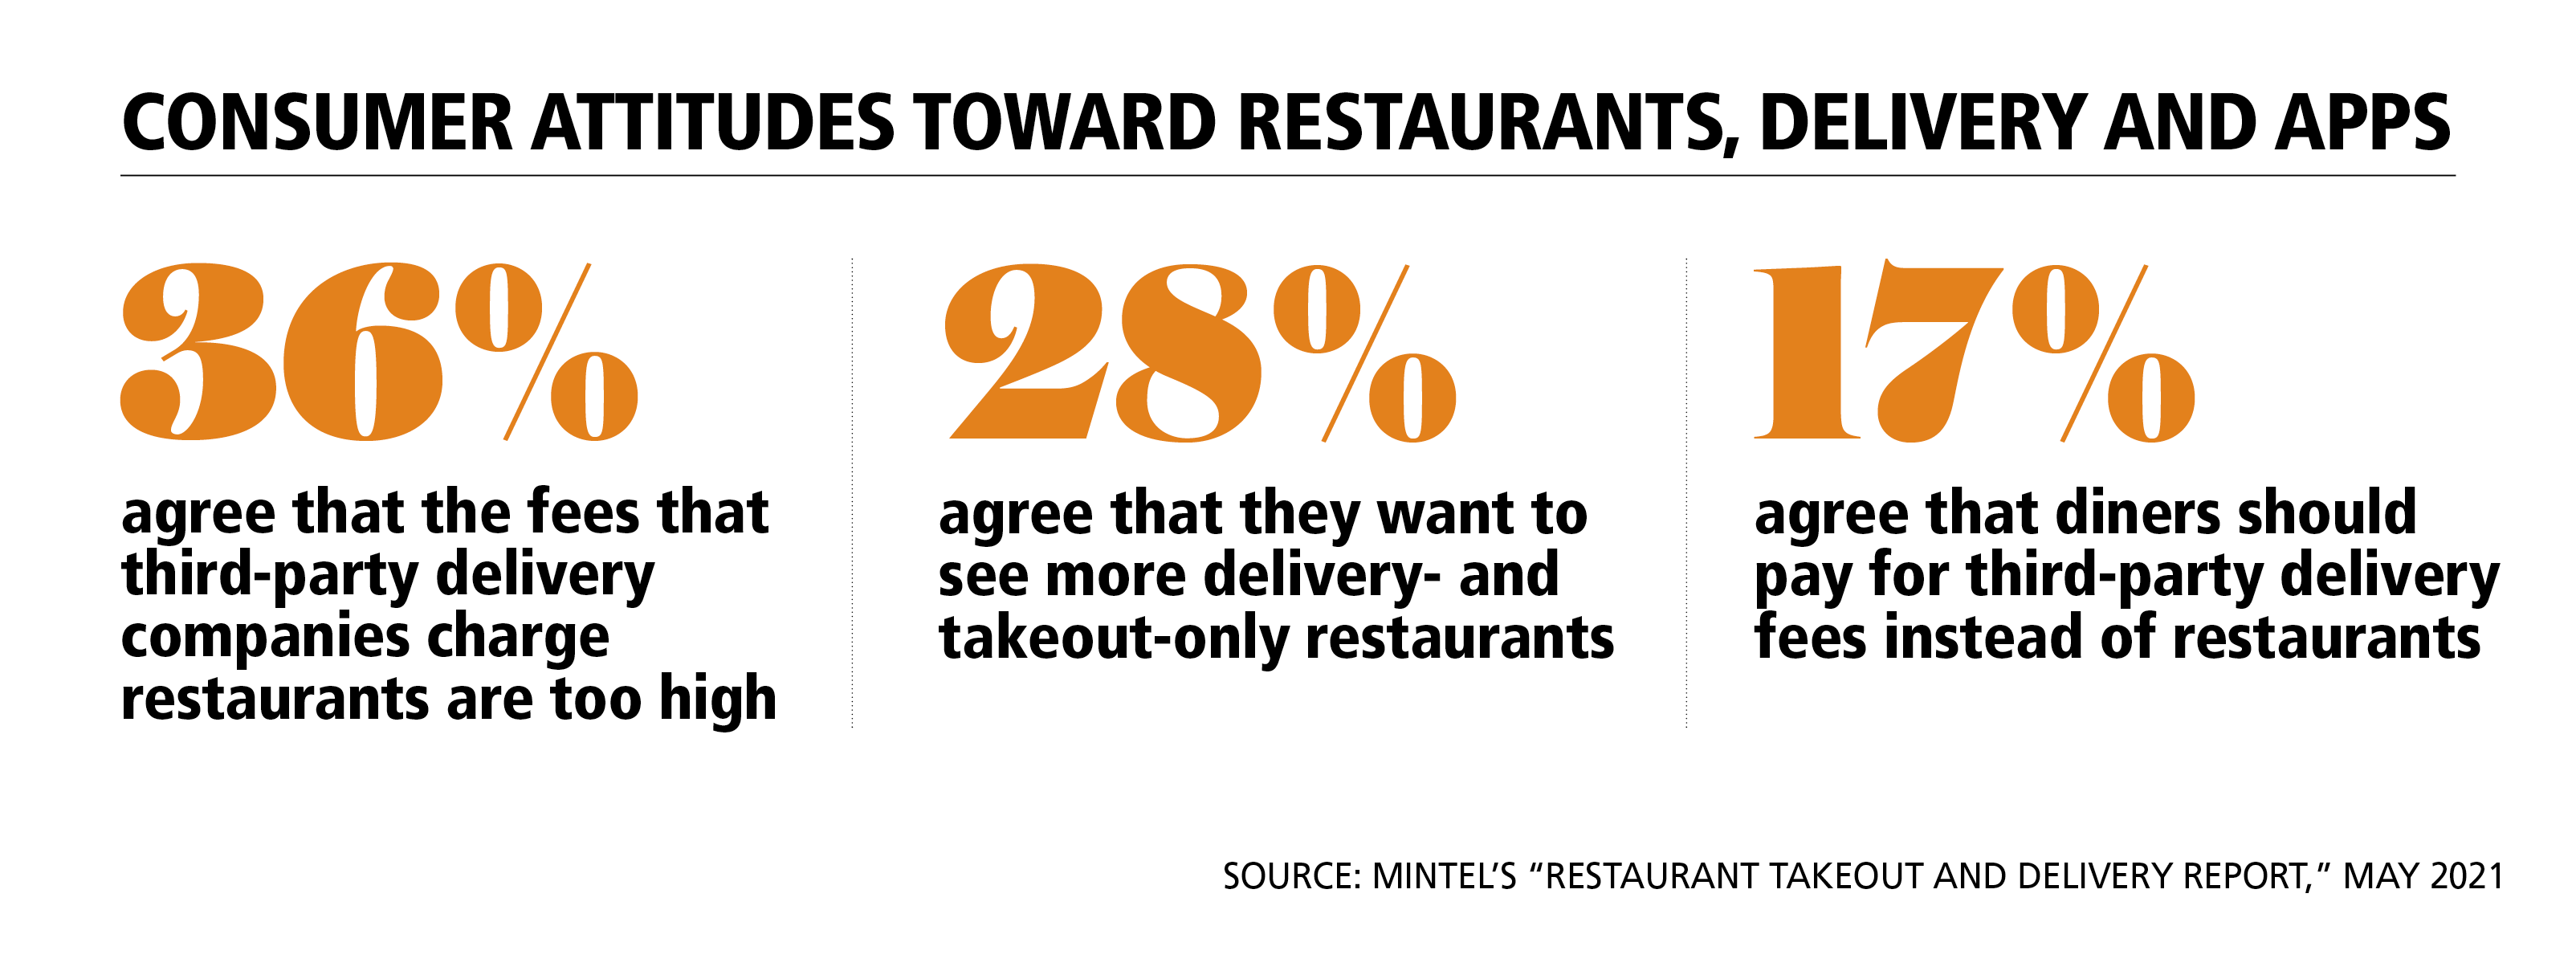 CONSUMER ATTITUDES TOWARD RESTAURANT, DELIVERY AND APPS1.png